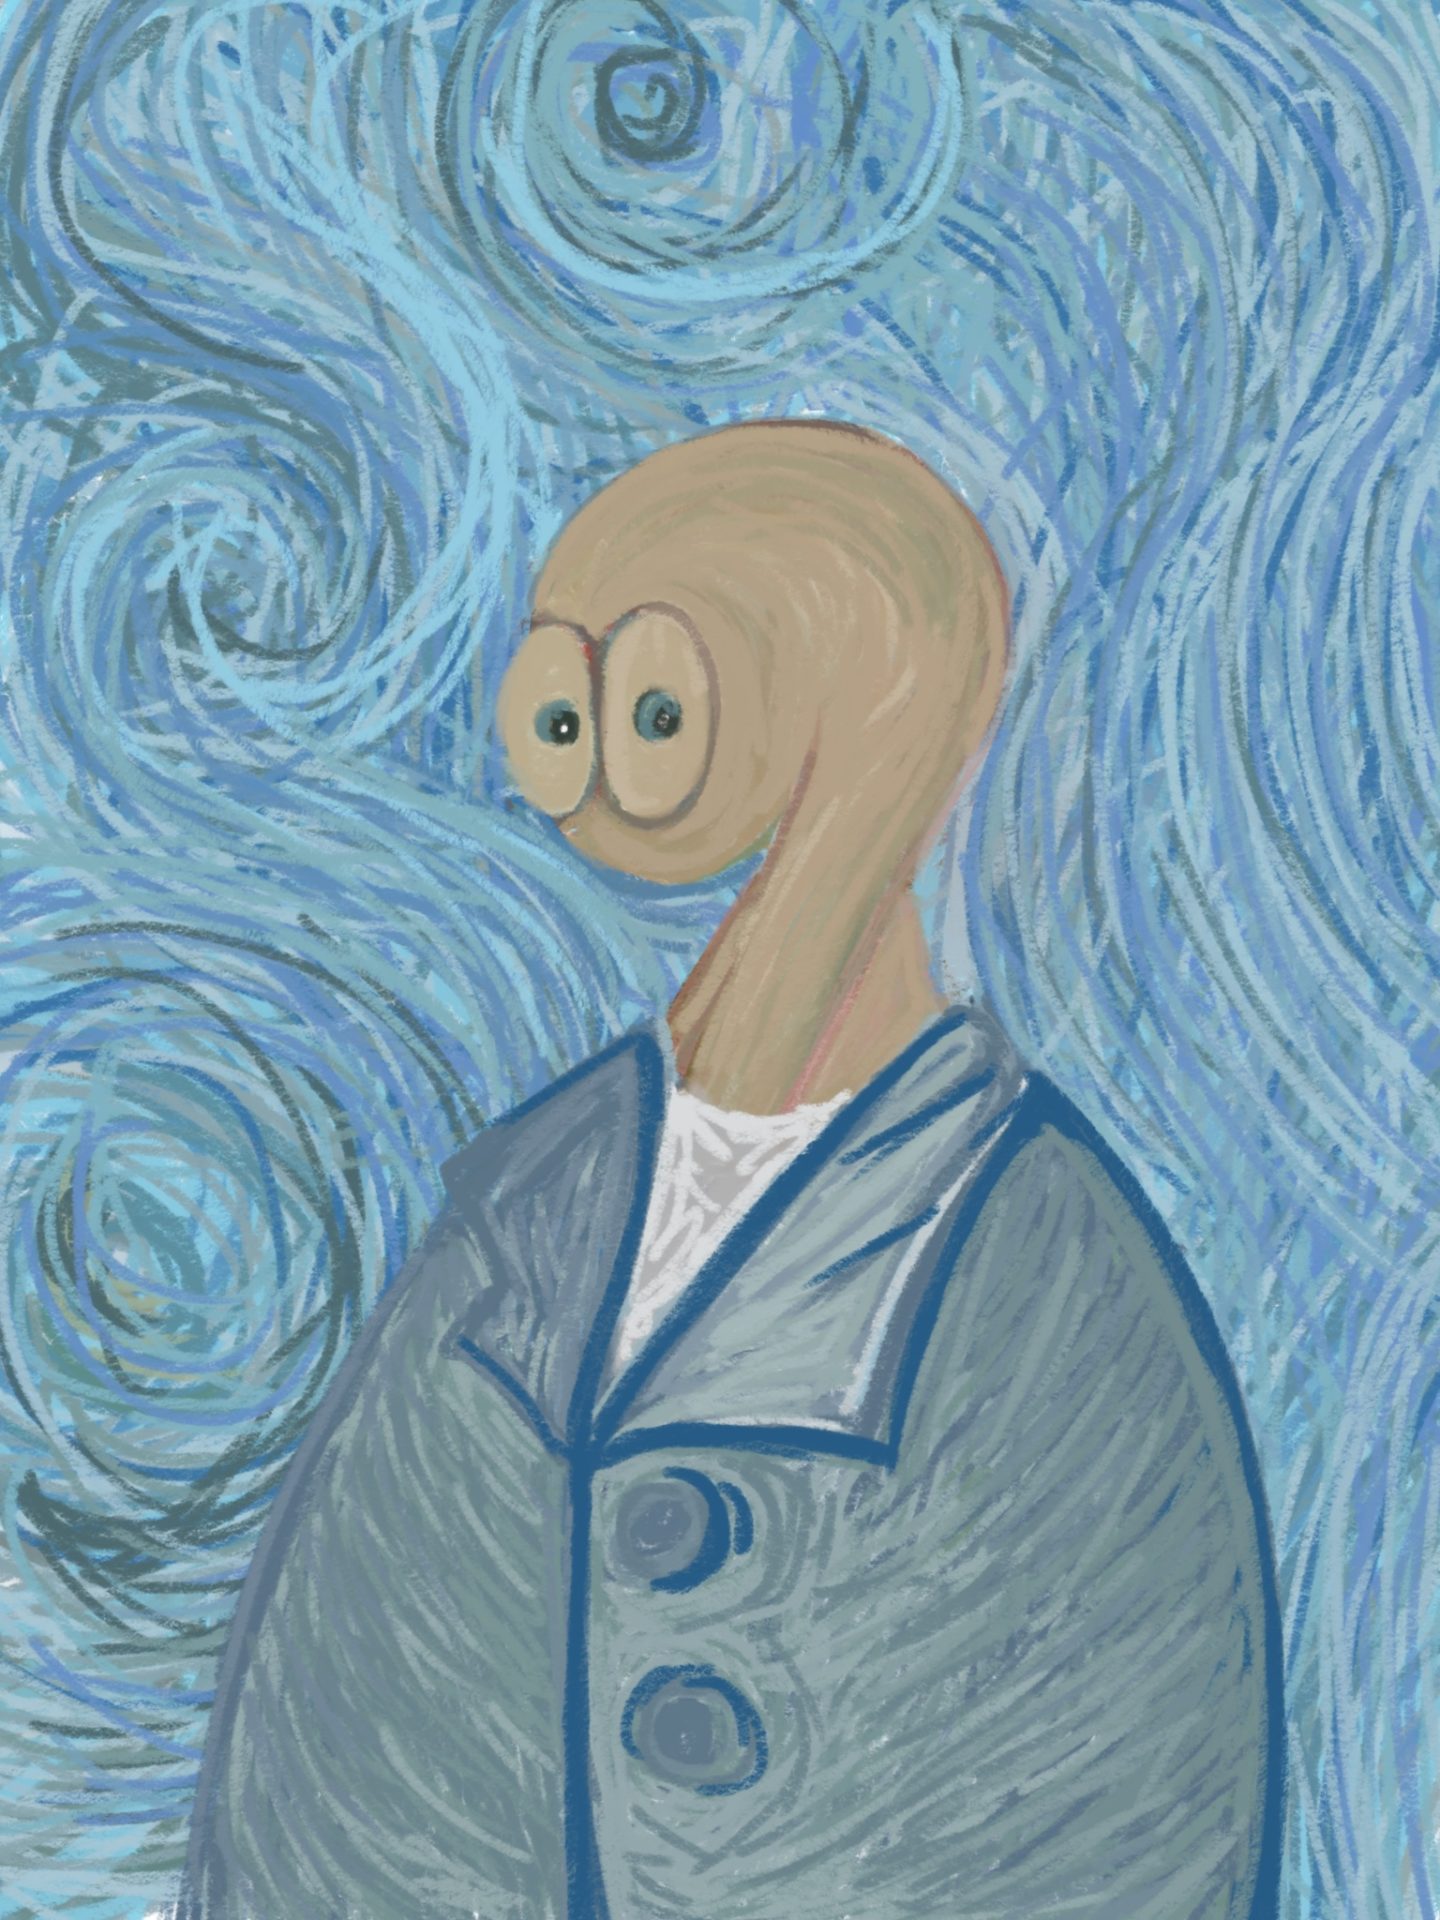 405b: extra art Tuesday. Portrait of a Thing as Van Gogh!